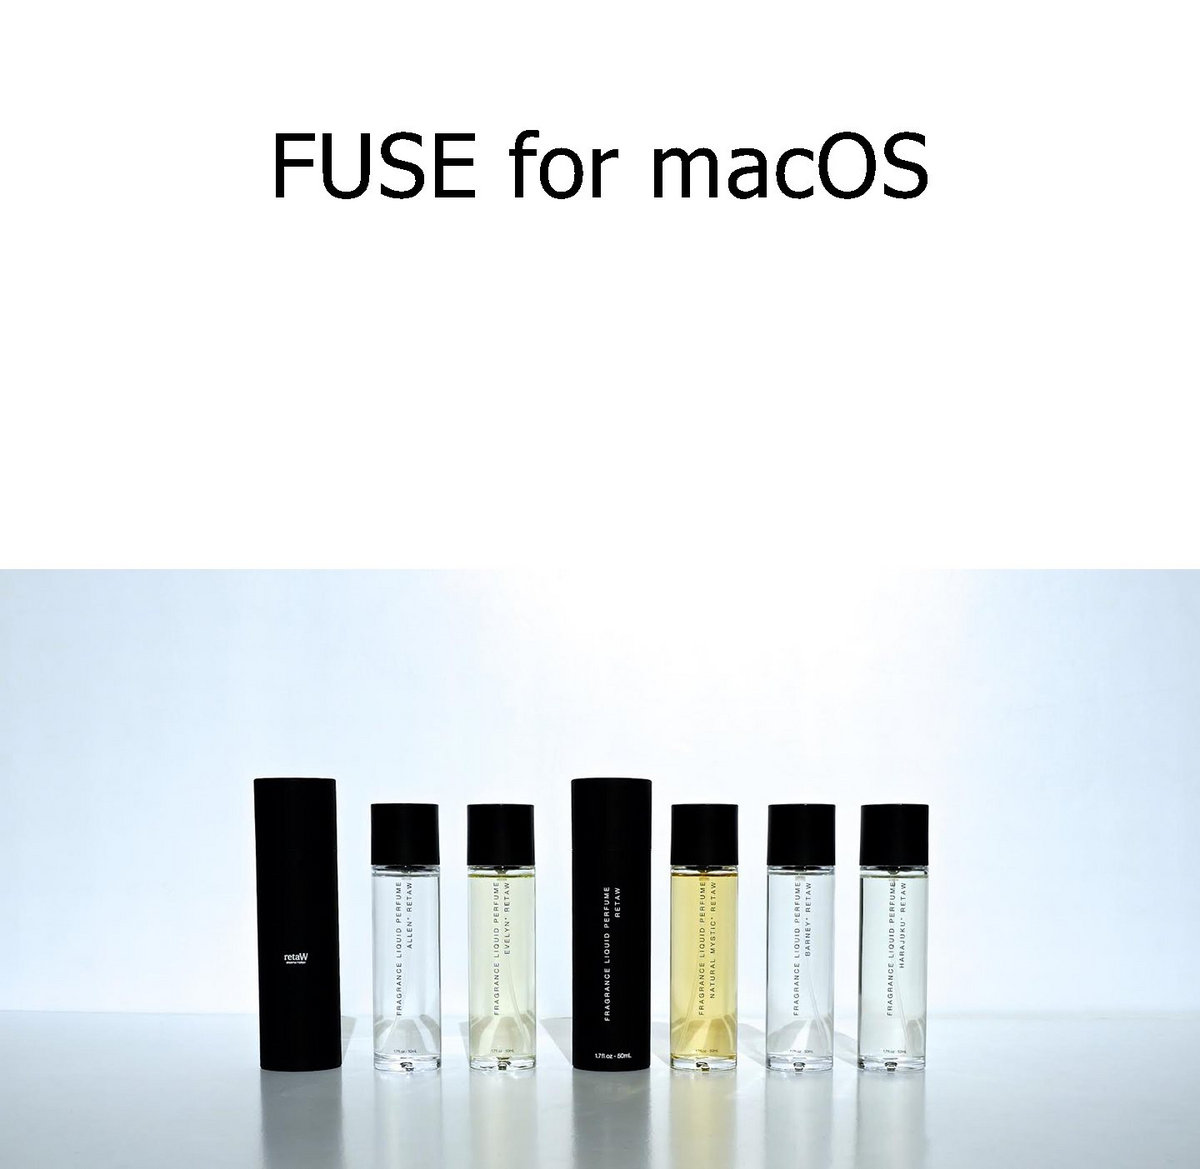 similar to fuse for macos